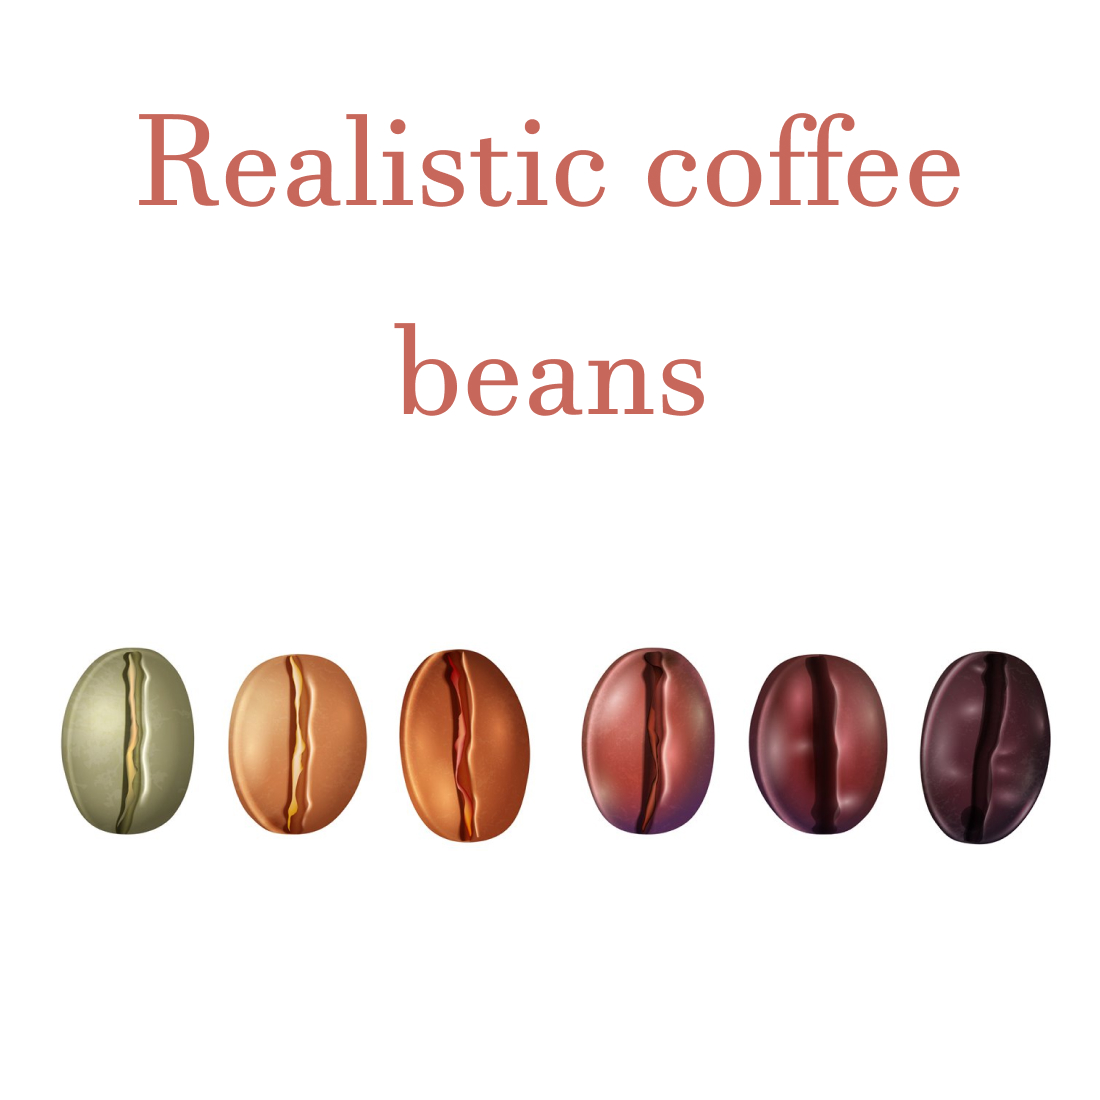 Preview realistic coffee beans.